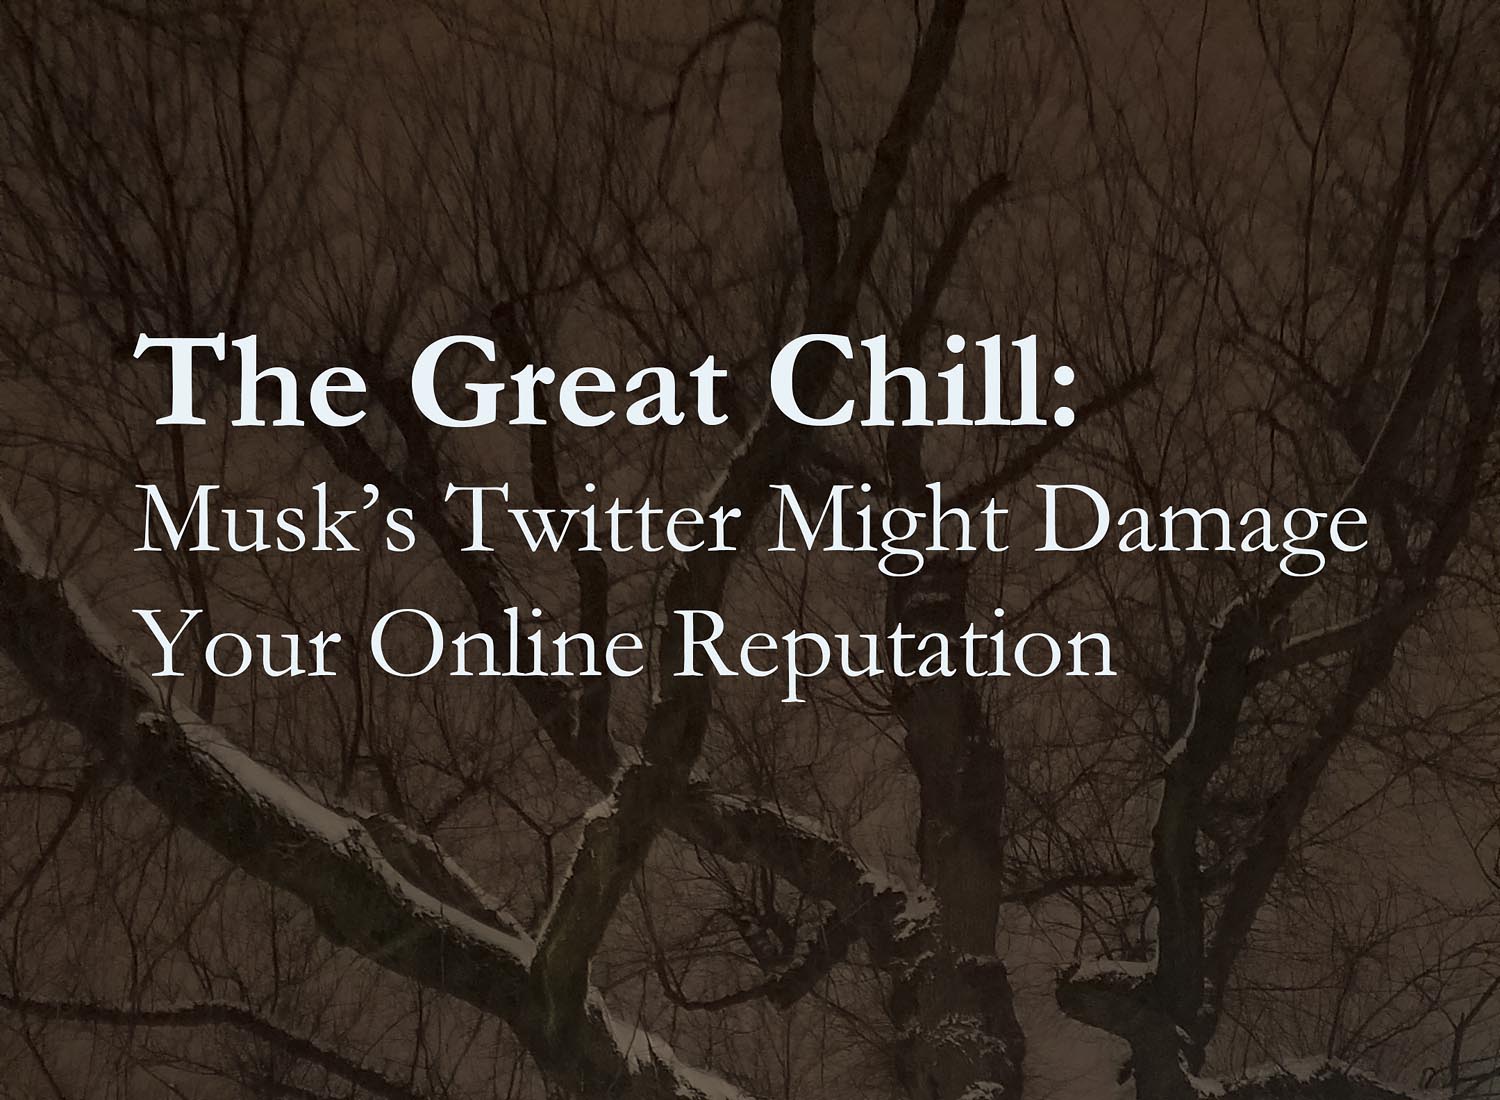 5 Ways Twitter Can Damage Your Online Reputation, by Recover Reputation: Winter Tree